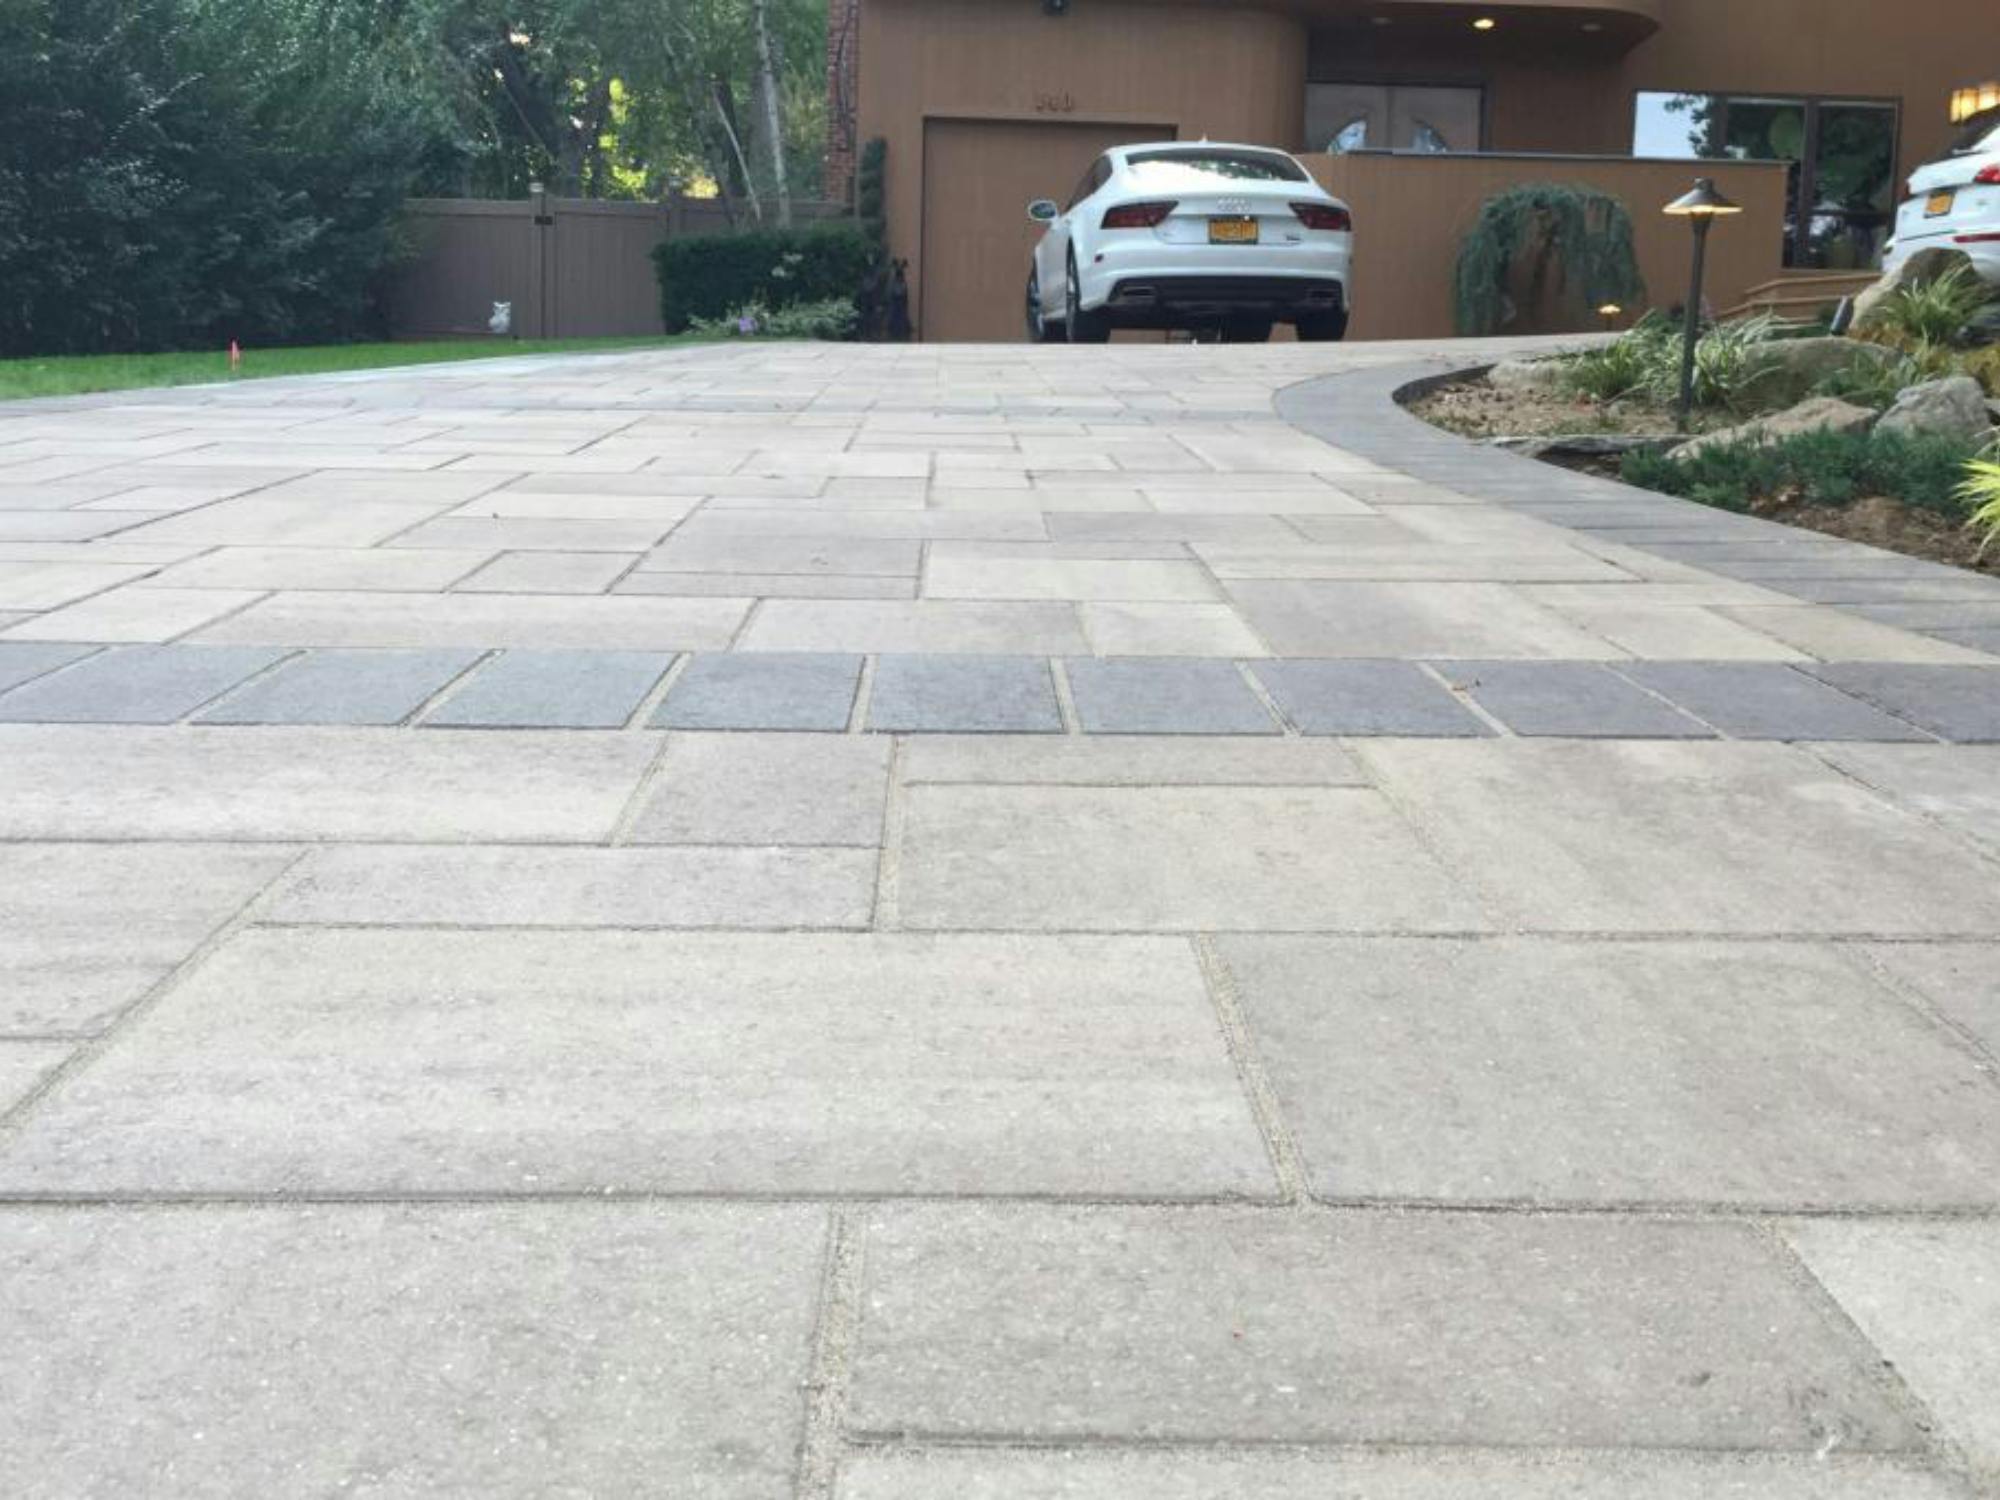 Paving Stone Driveway Worth the Cost?